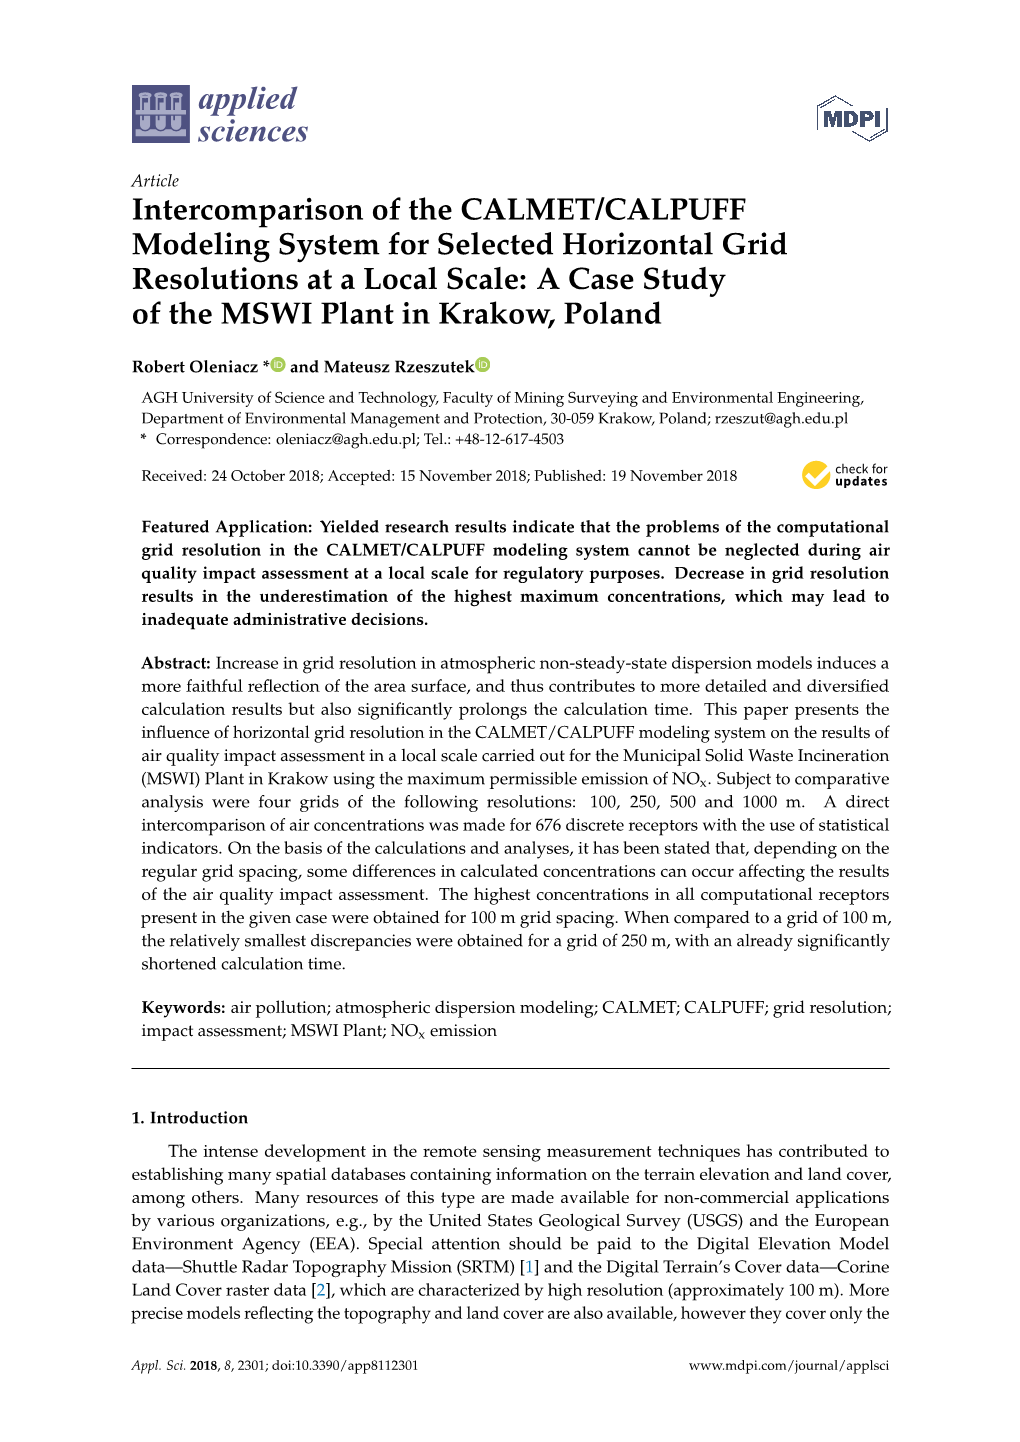 Intercomparison of the CALMET/CALPUFF Modeling System for Selected Horizontal Grid Resolutions at a Local Scale: a Case Study of the MSWI Plant in Krakow, Poland